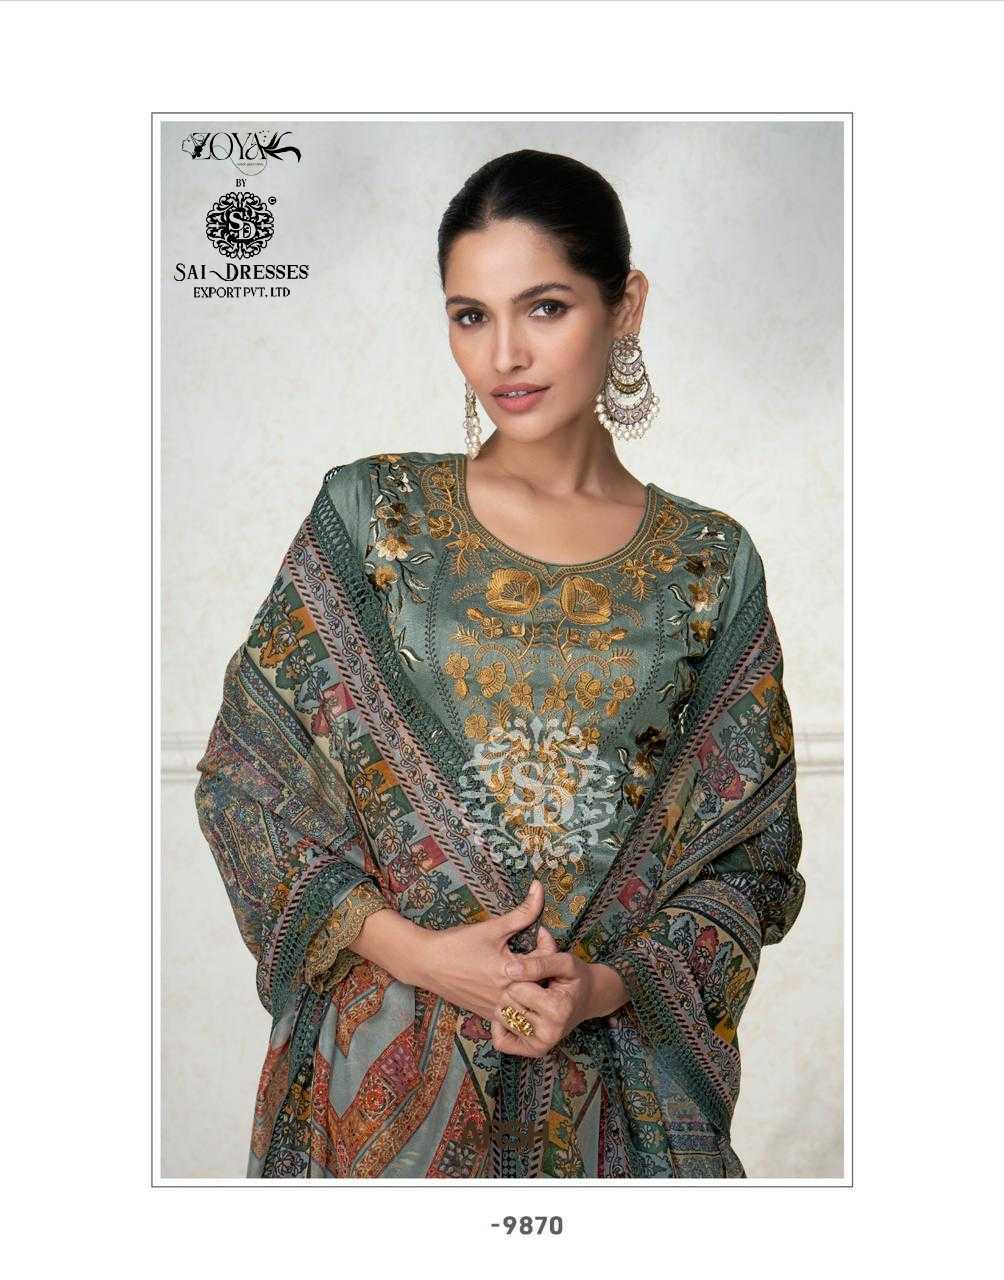  ARSH READY TO EXCLUSIVE WEAR PREMIUM SILK HEAVY DESIGNER 3 PIECE SUITS IN WHOLESALE RATE IN SURAT  